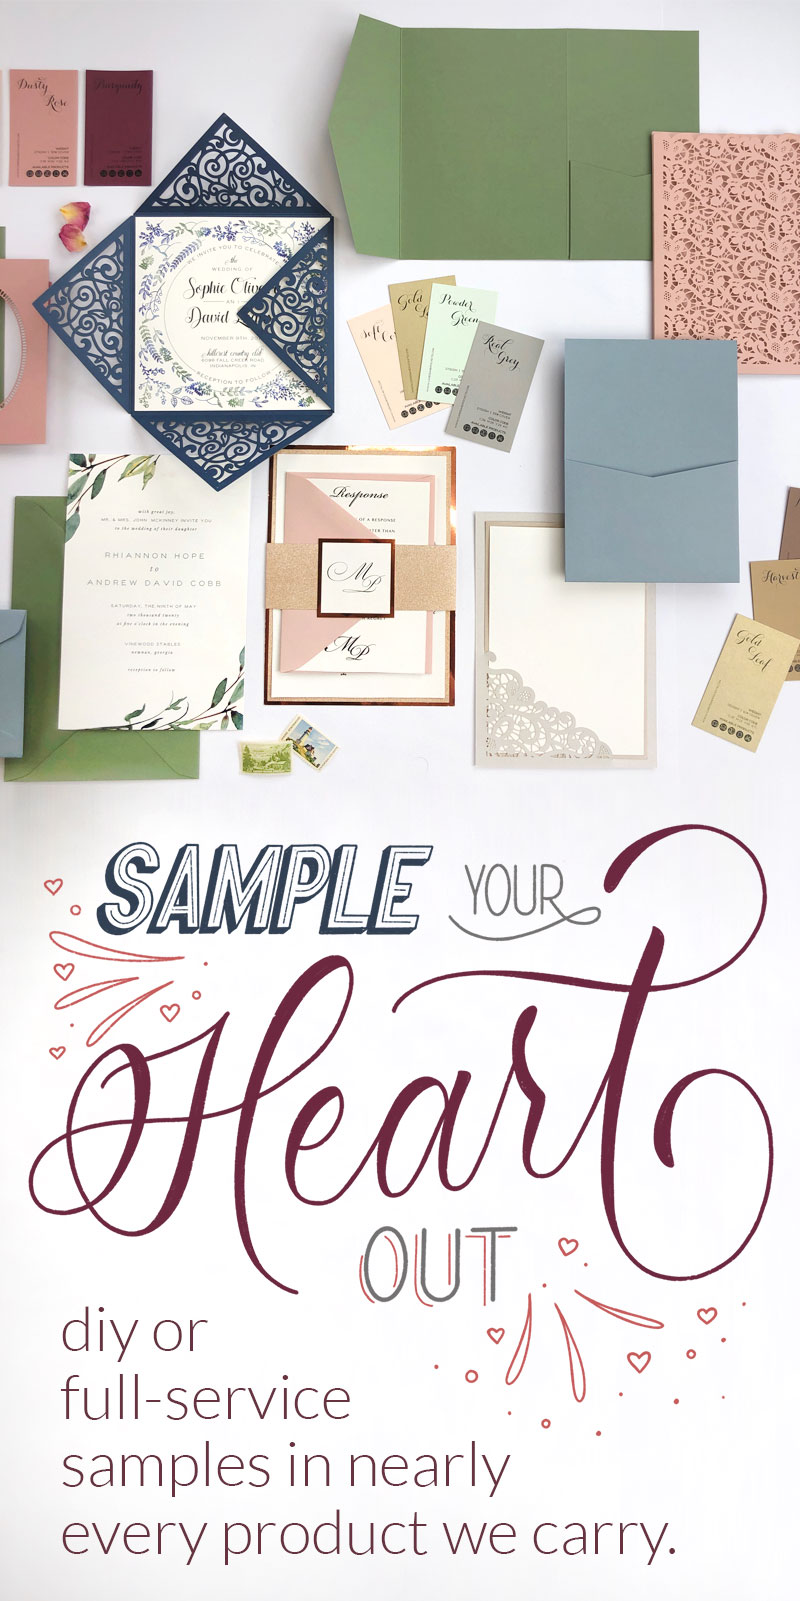 Details about   K & COMPANY 18 Tag Shape Cards w/Envelopes Cardmaking 5x7" Invitations Scrapbook 